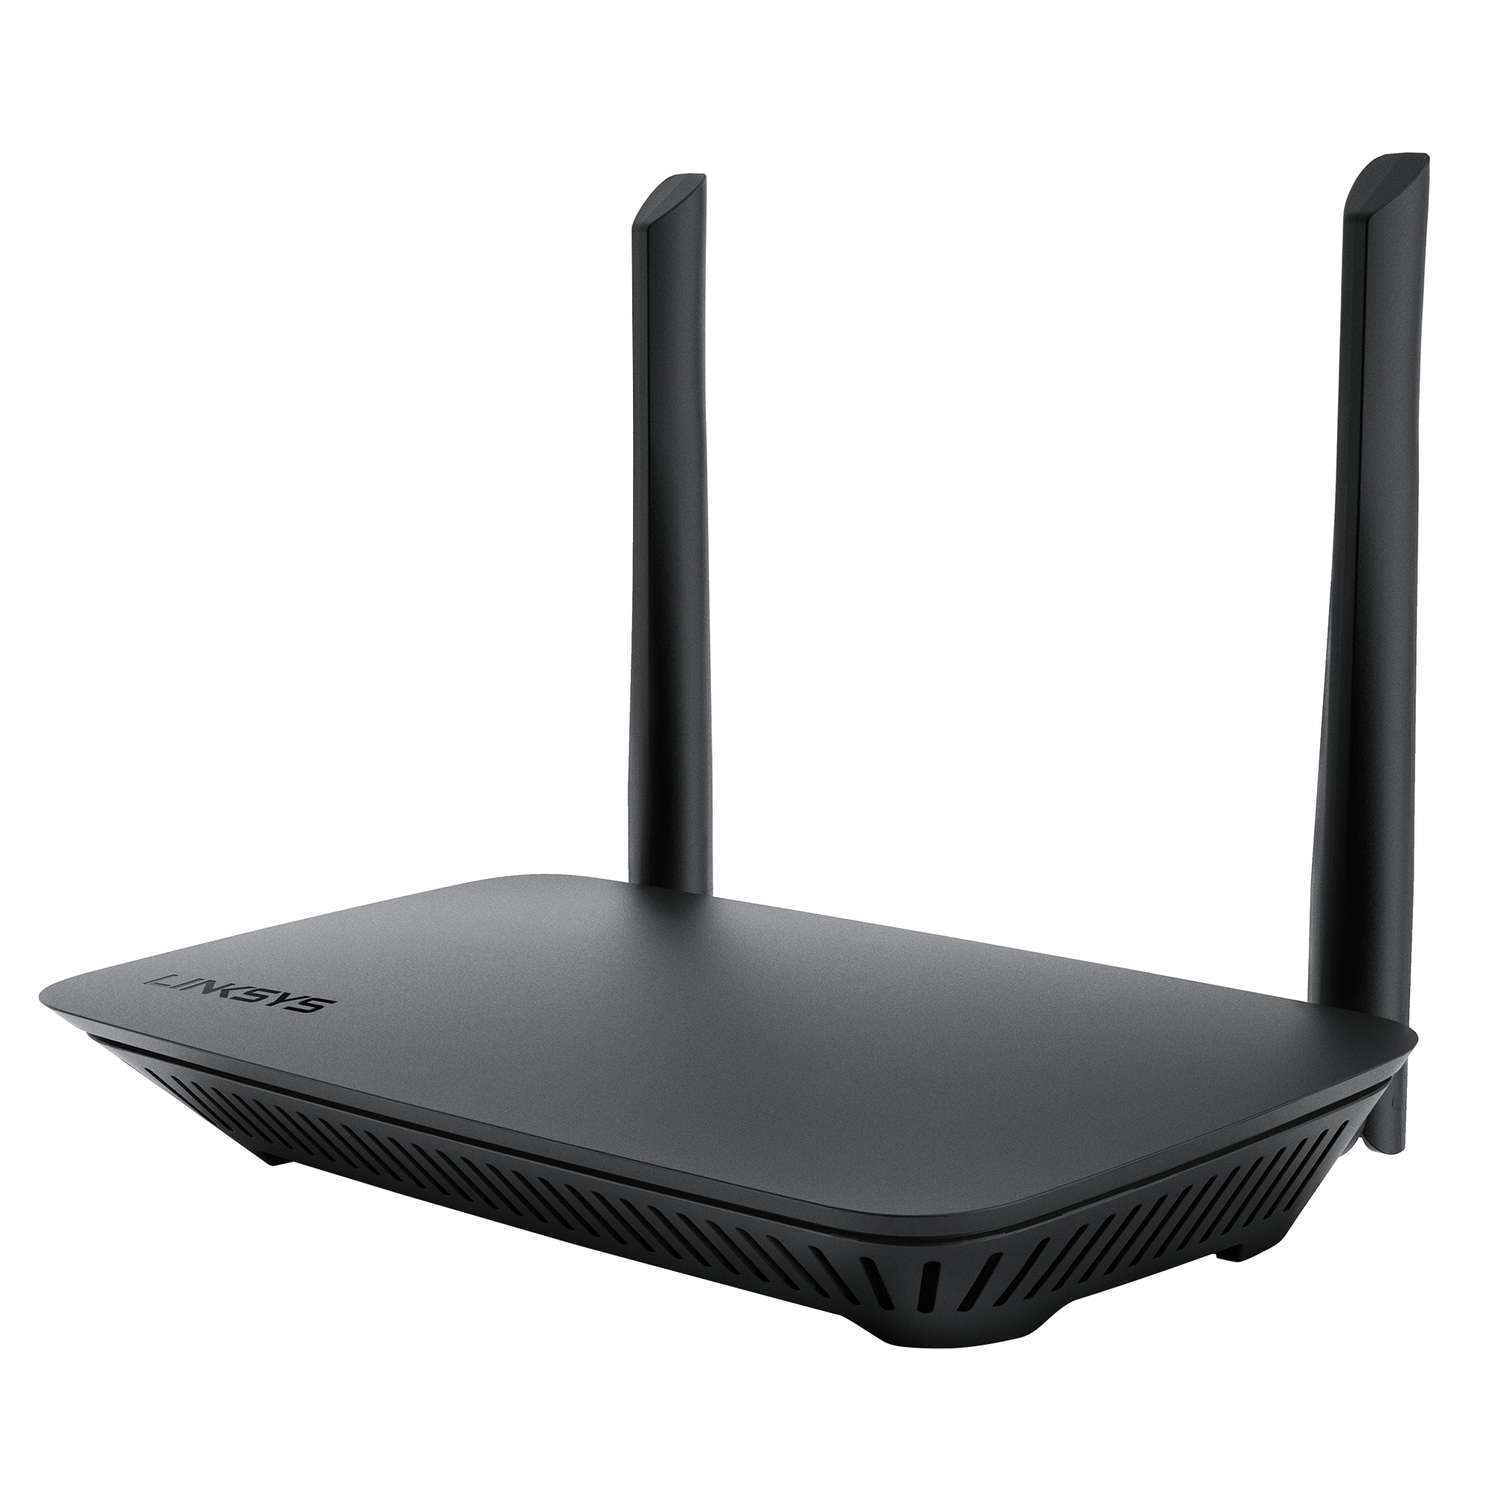 Rack Mountable Wireless-Wi-Fi 802.11a Enterprise Routers for sale